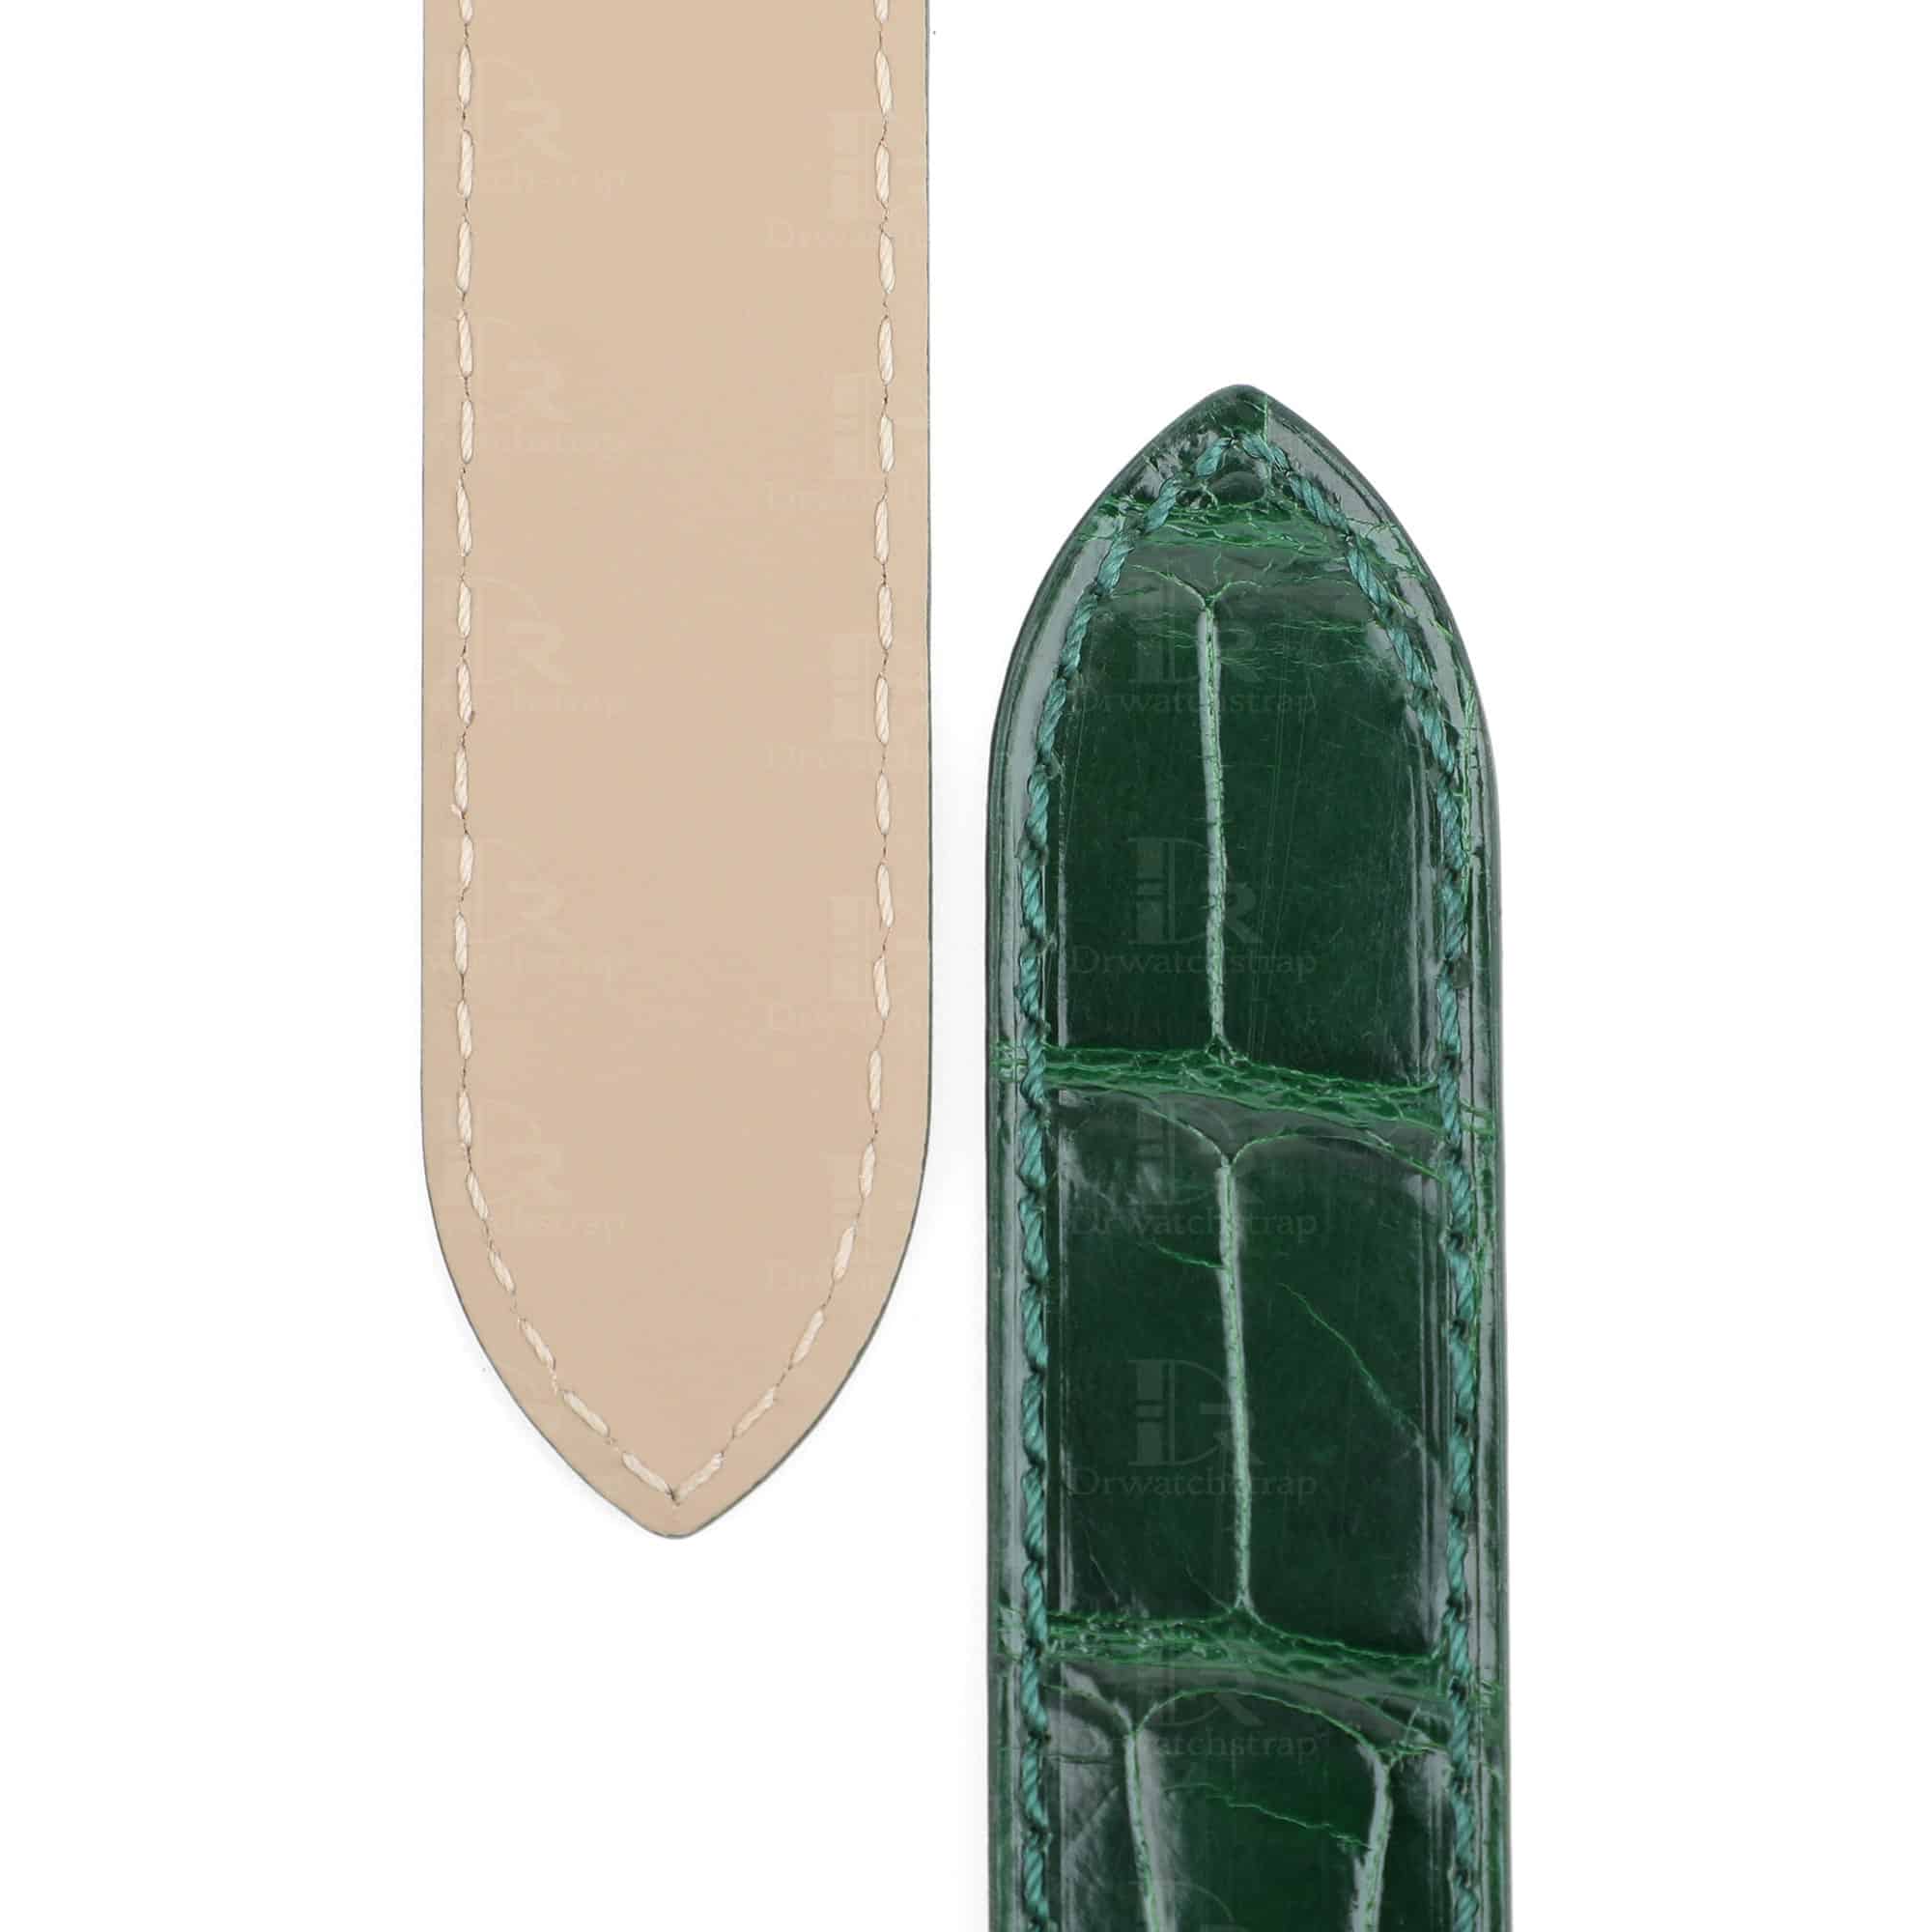 Genuine custom green alligator leaher strap and watch band replacement for Cartier Ballon bleu watches - OEM high-end quality watchbands online at a low price